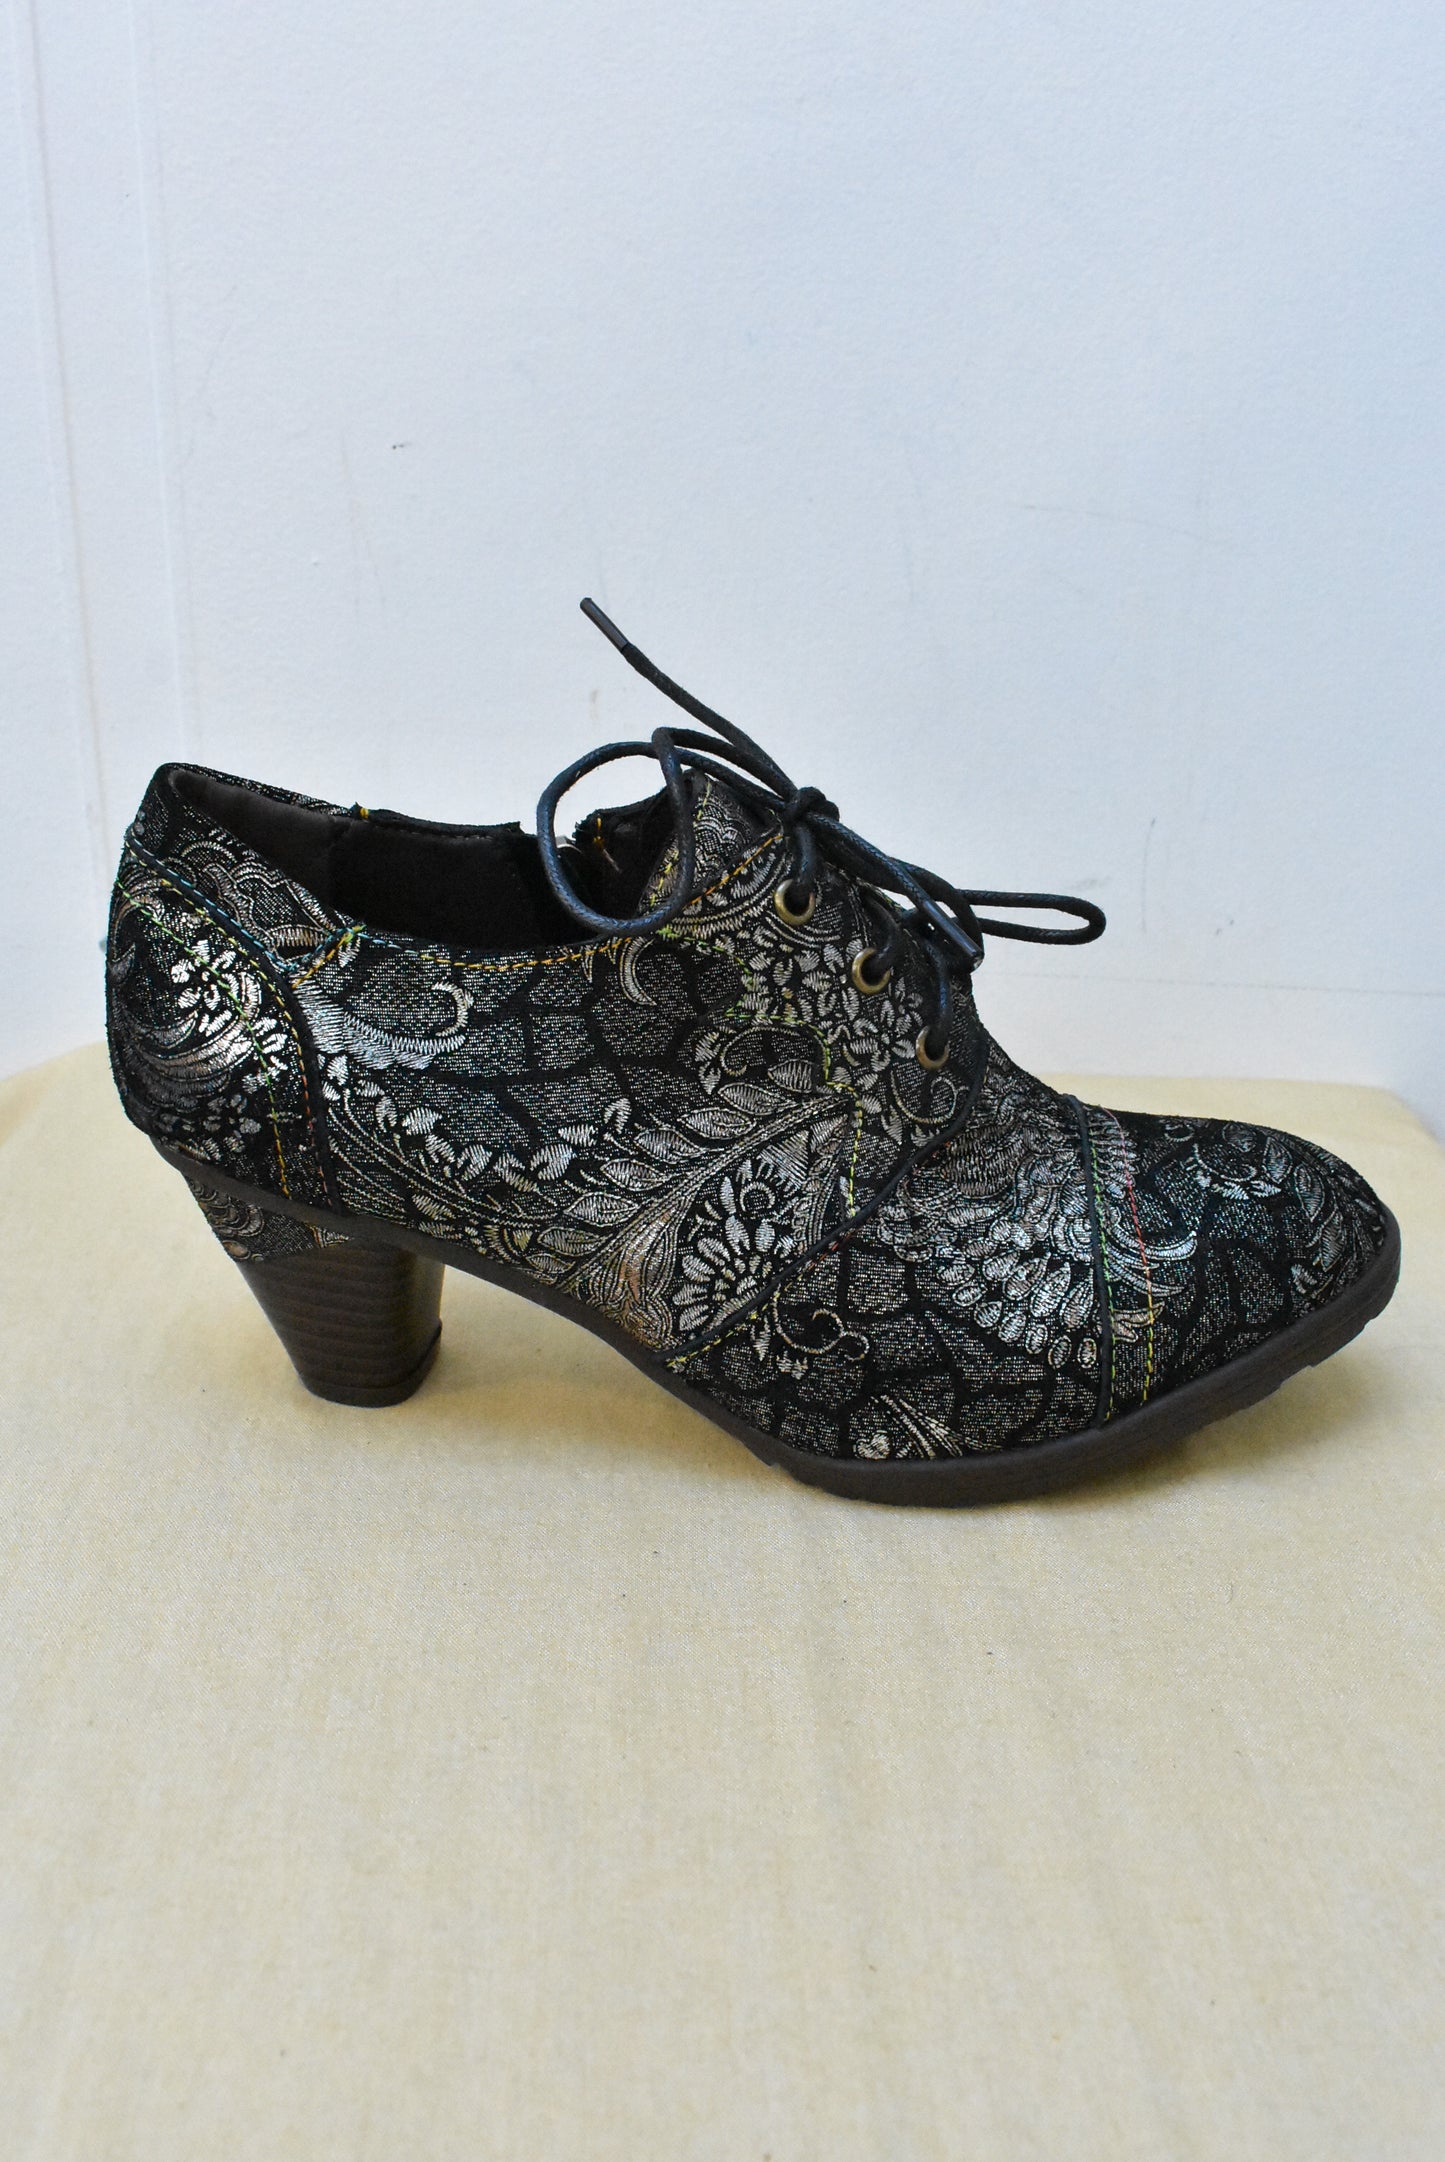 Shiny brocade look lace-up heeled ankle boots, 40 (NEW)